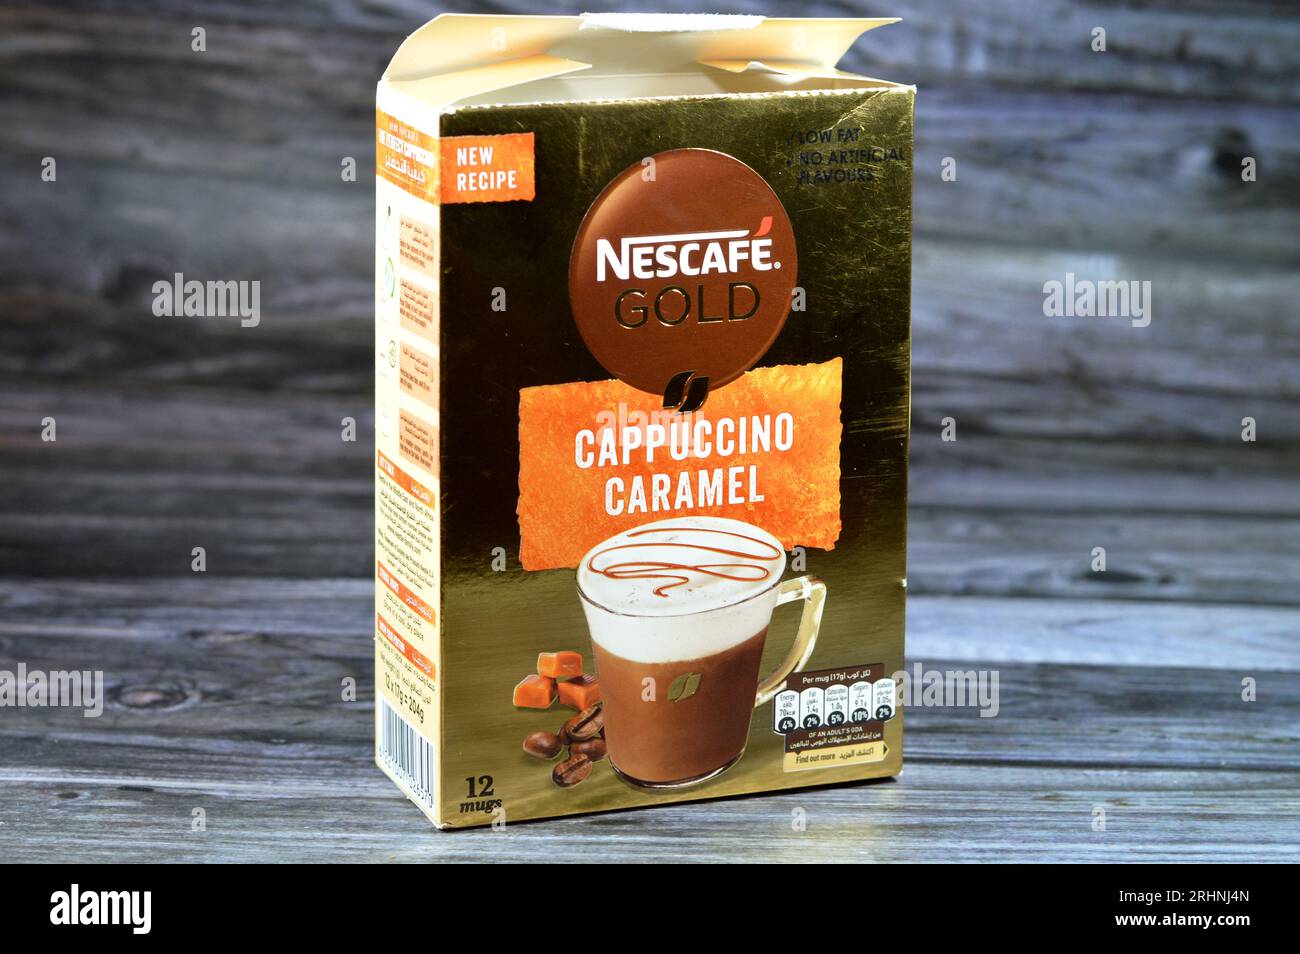 LONDON, UK - AUGUST 15, 2019: Pack of Nescafe Gold Cappuccino Skinny on  White Background Editorial Stock Image - Image of drink, caramel: 156179114